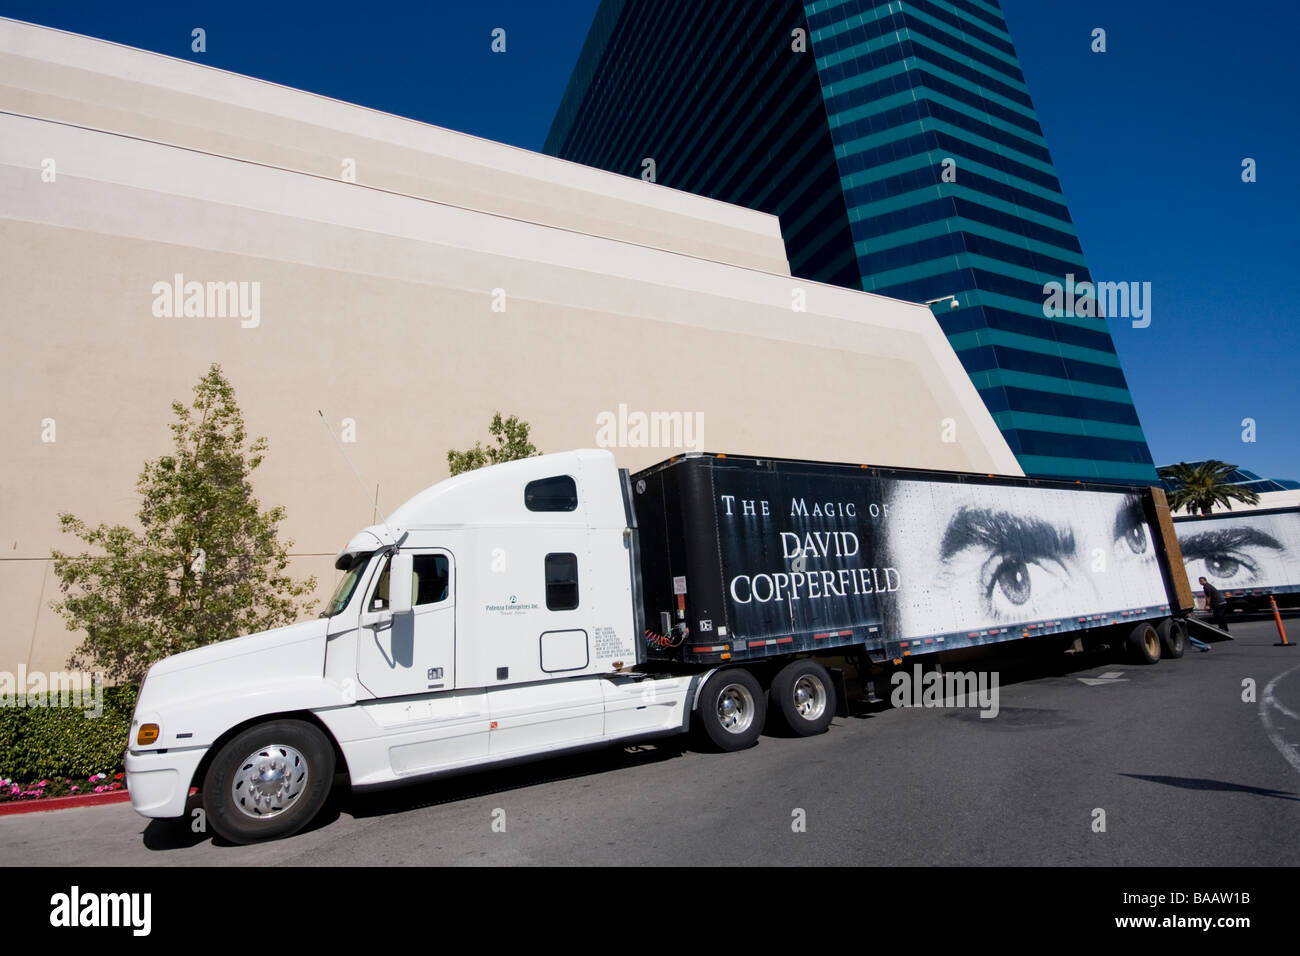 David Copperfield magic show arrives to unload at MGM Grand Hotel and Casino, Las Vegas, Nevada, US Stock Photo